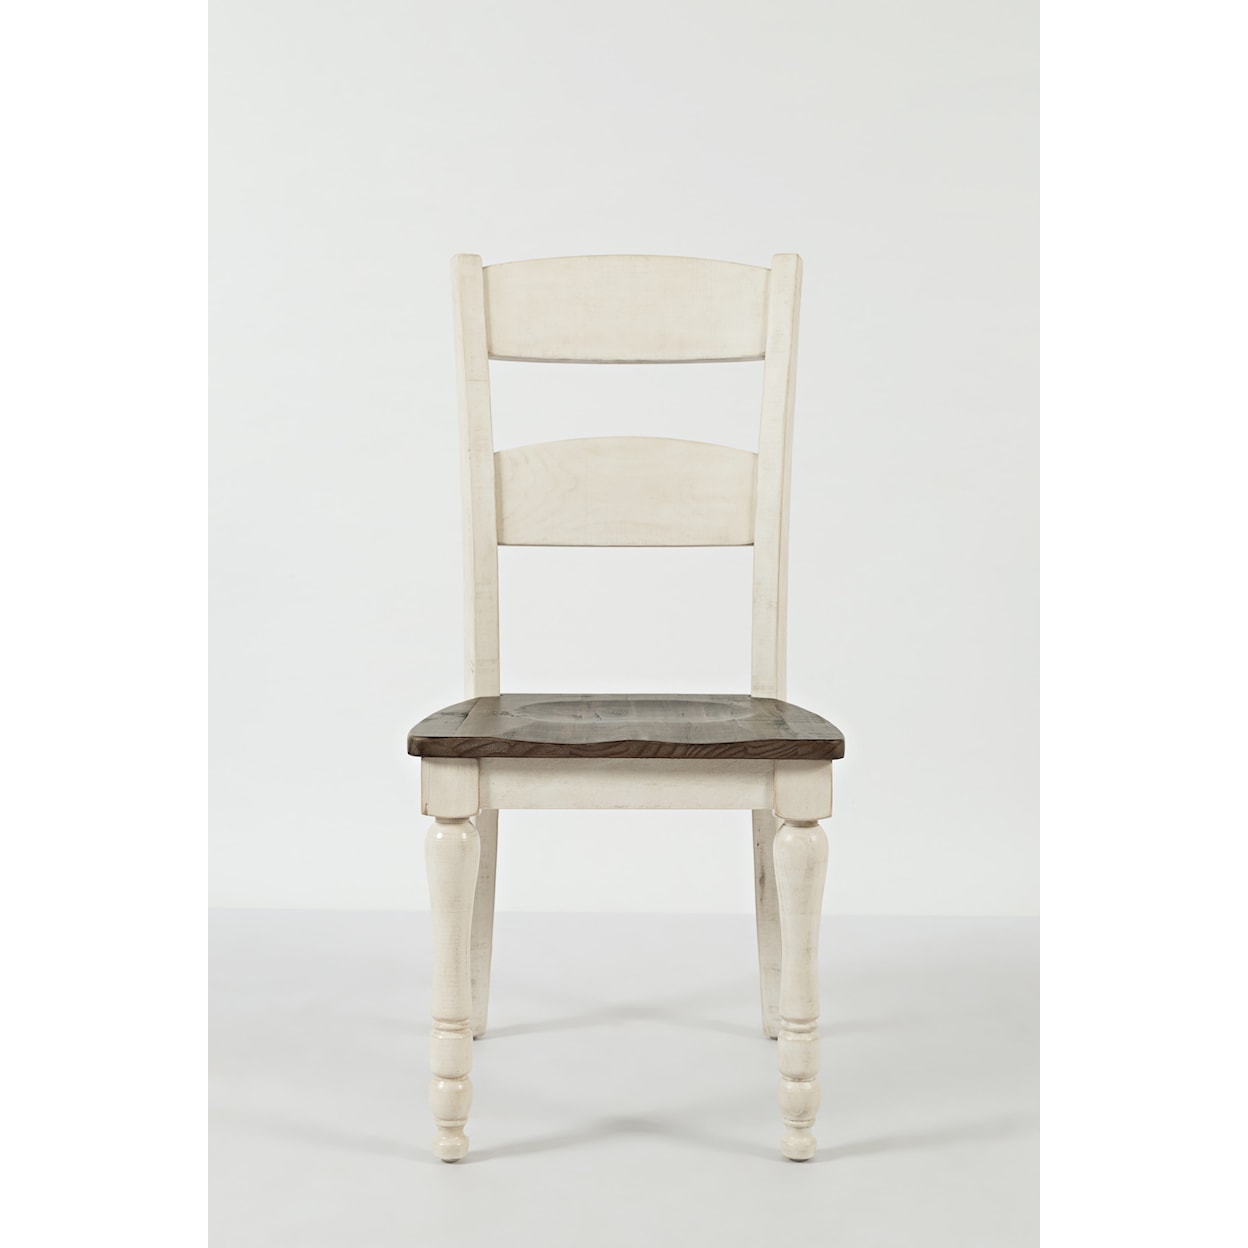 Belfort Essentials Stableview Dining Chair